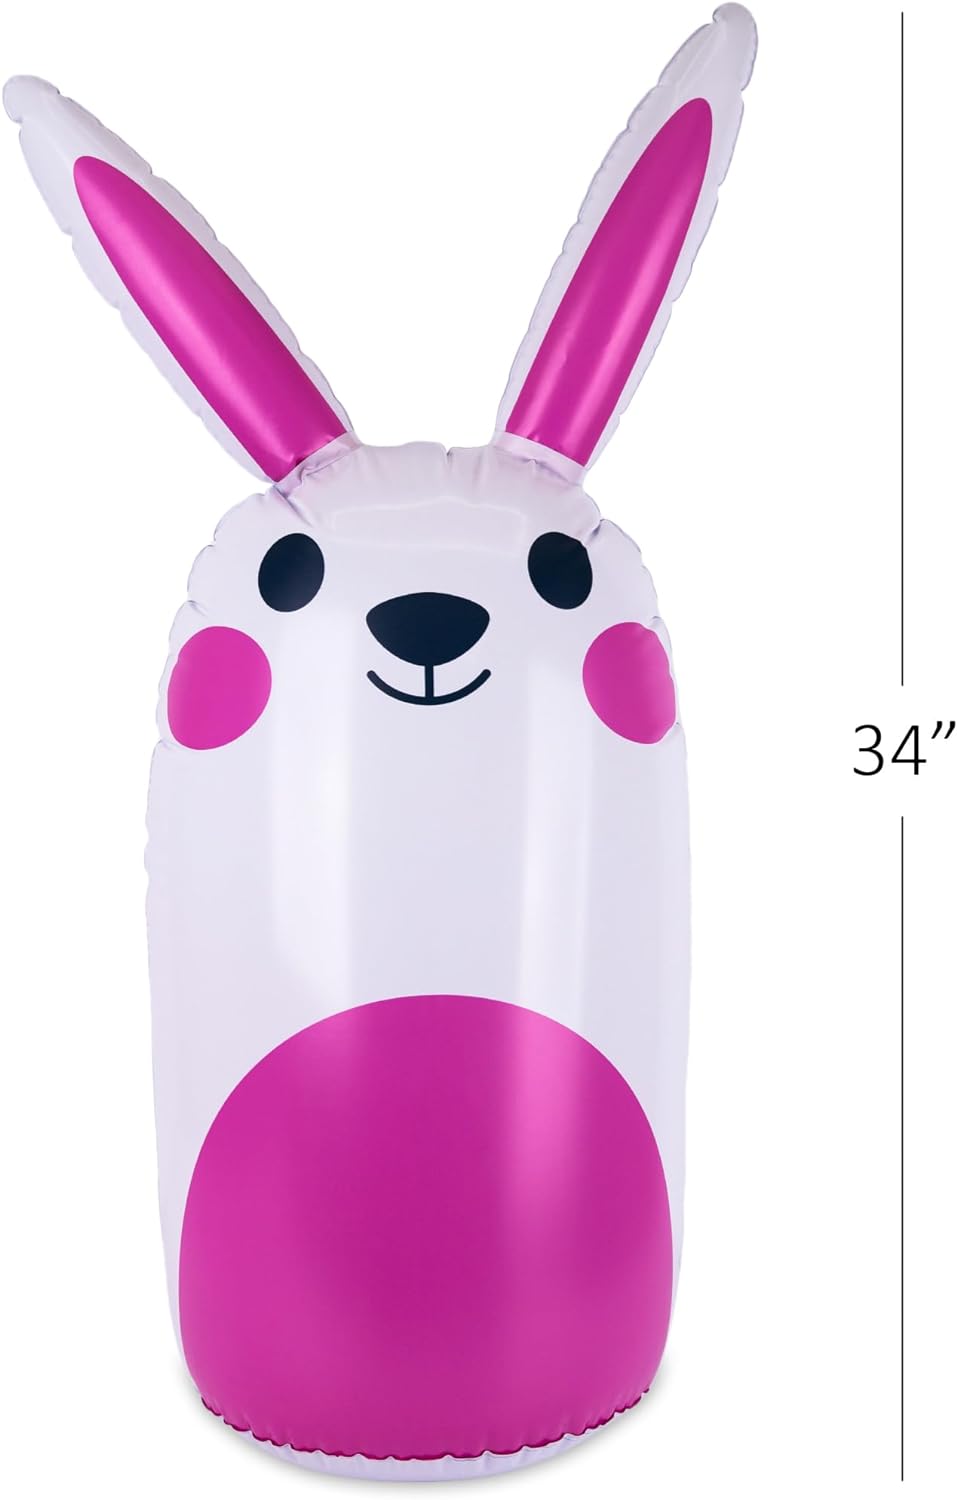 ArtCreativity Easter Bunny Inflatable Ring Toss Game - Easter Games for Kids with Inflatable Bunny and 6 Rings - Weighted Bottom to Keep The Inflatable Rabbit Upright - Outdoor Easter Family Games